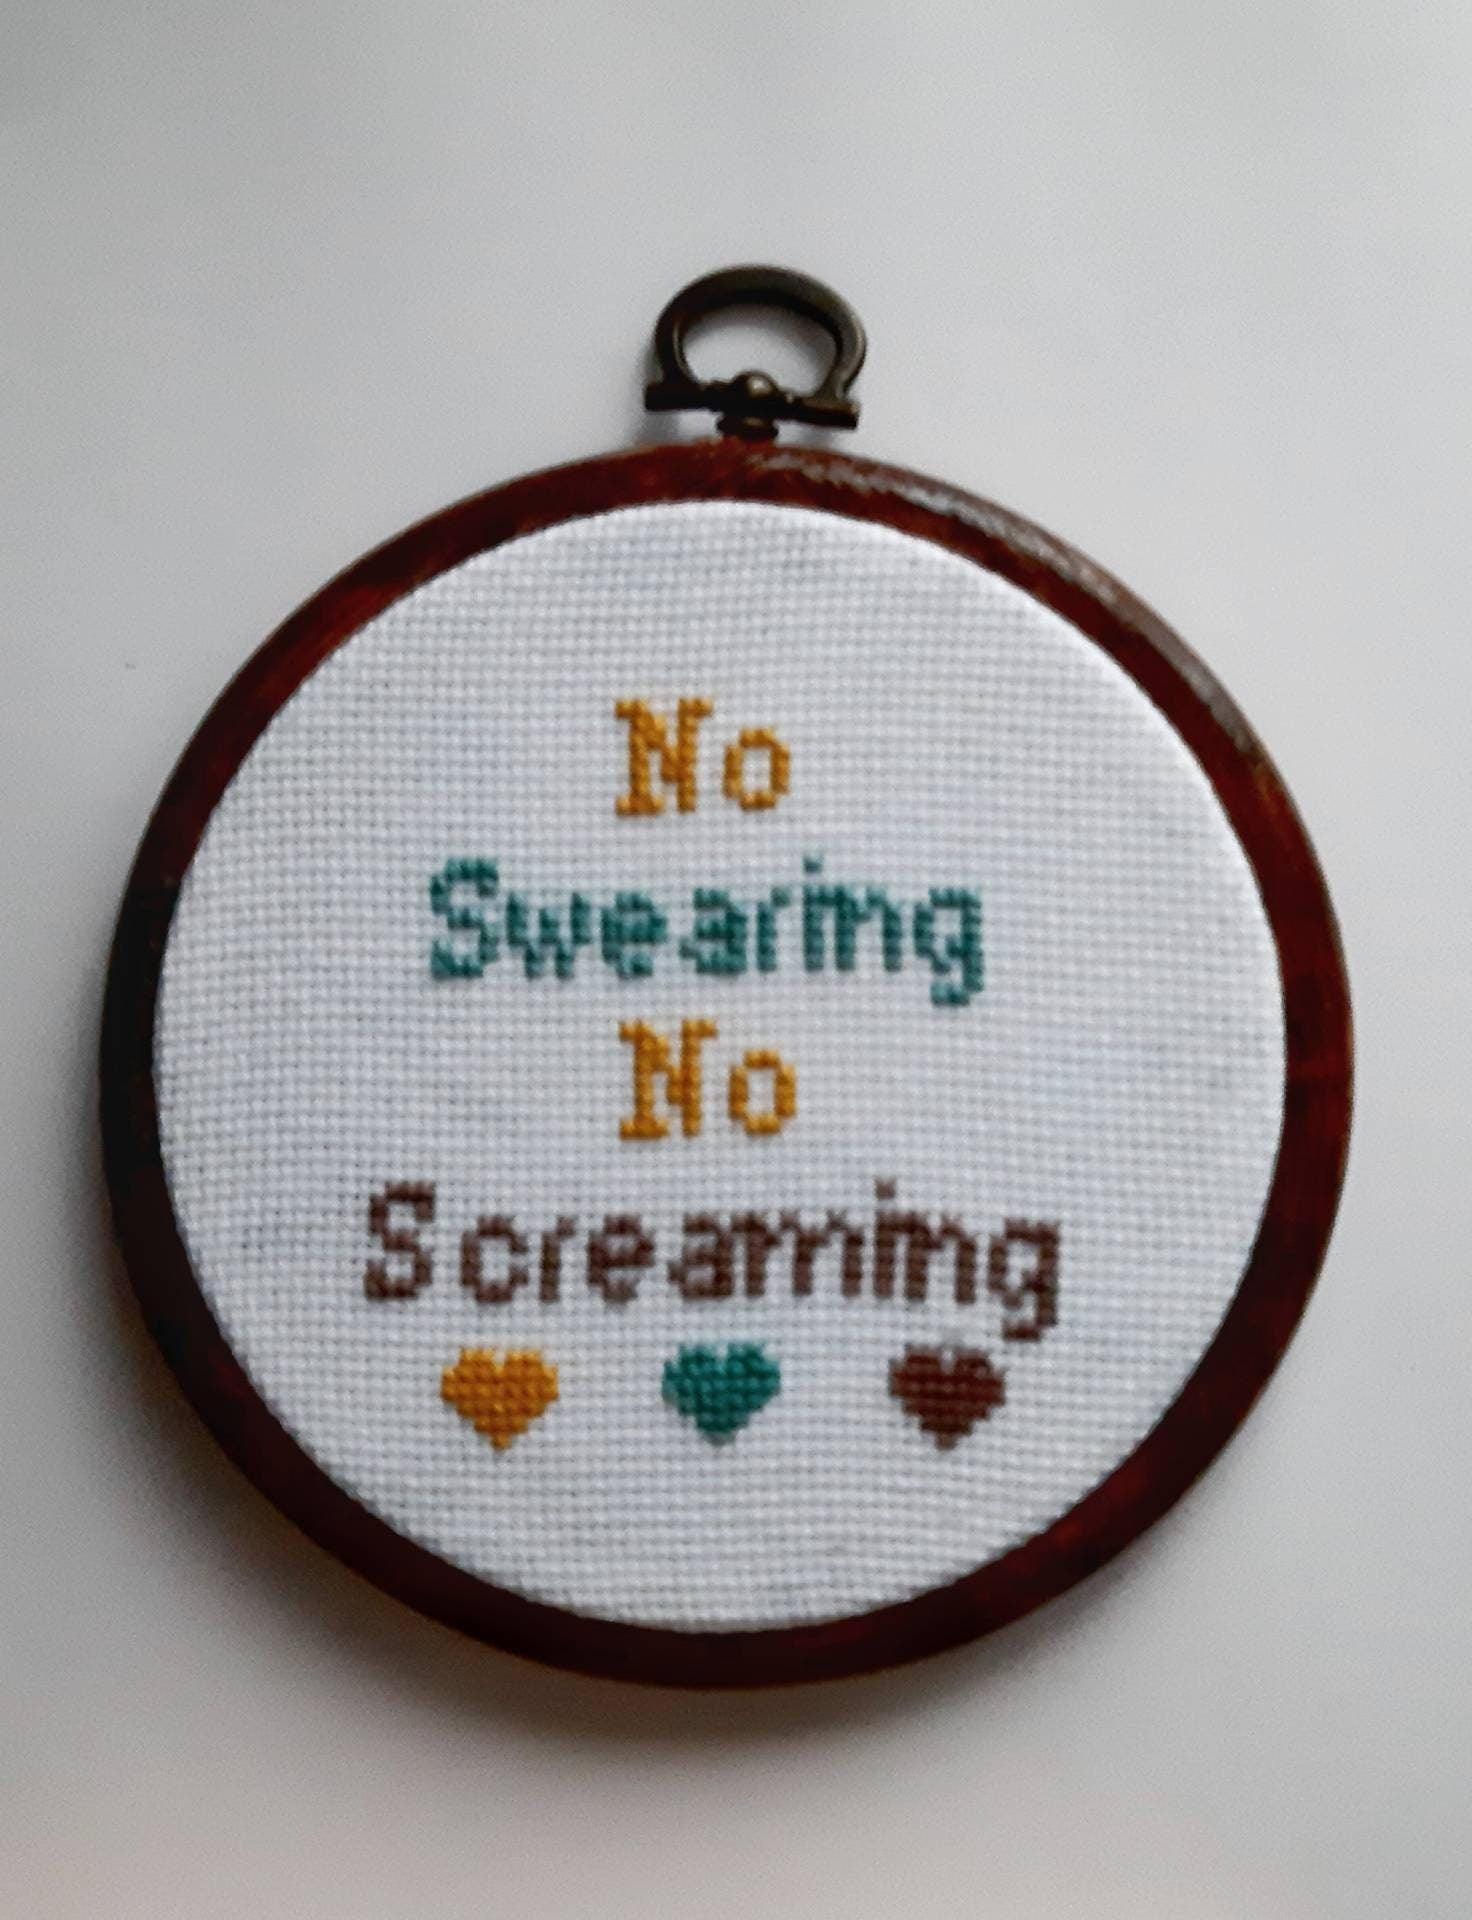 No swearing, no screaming, completed cross stitch quote - Thistleflat Crafts